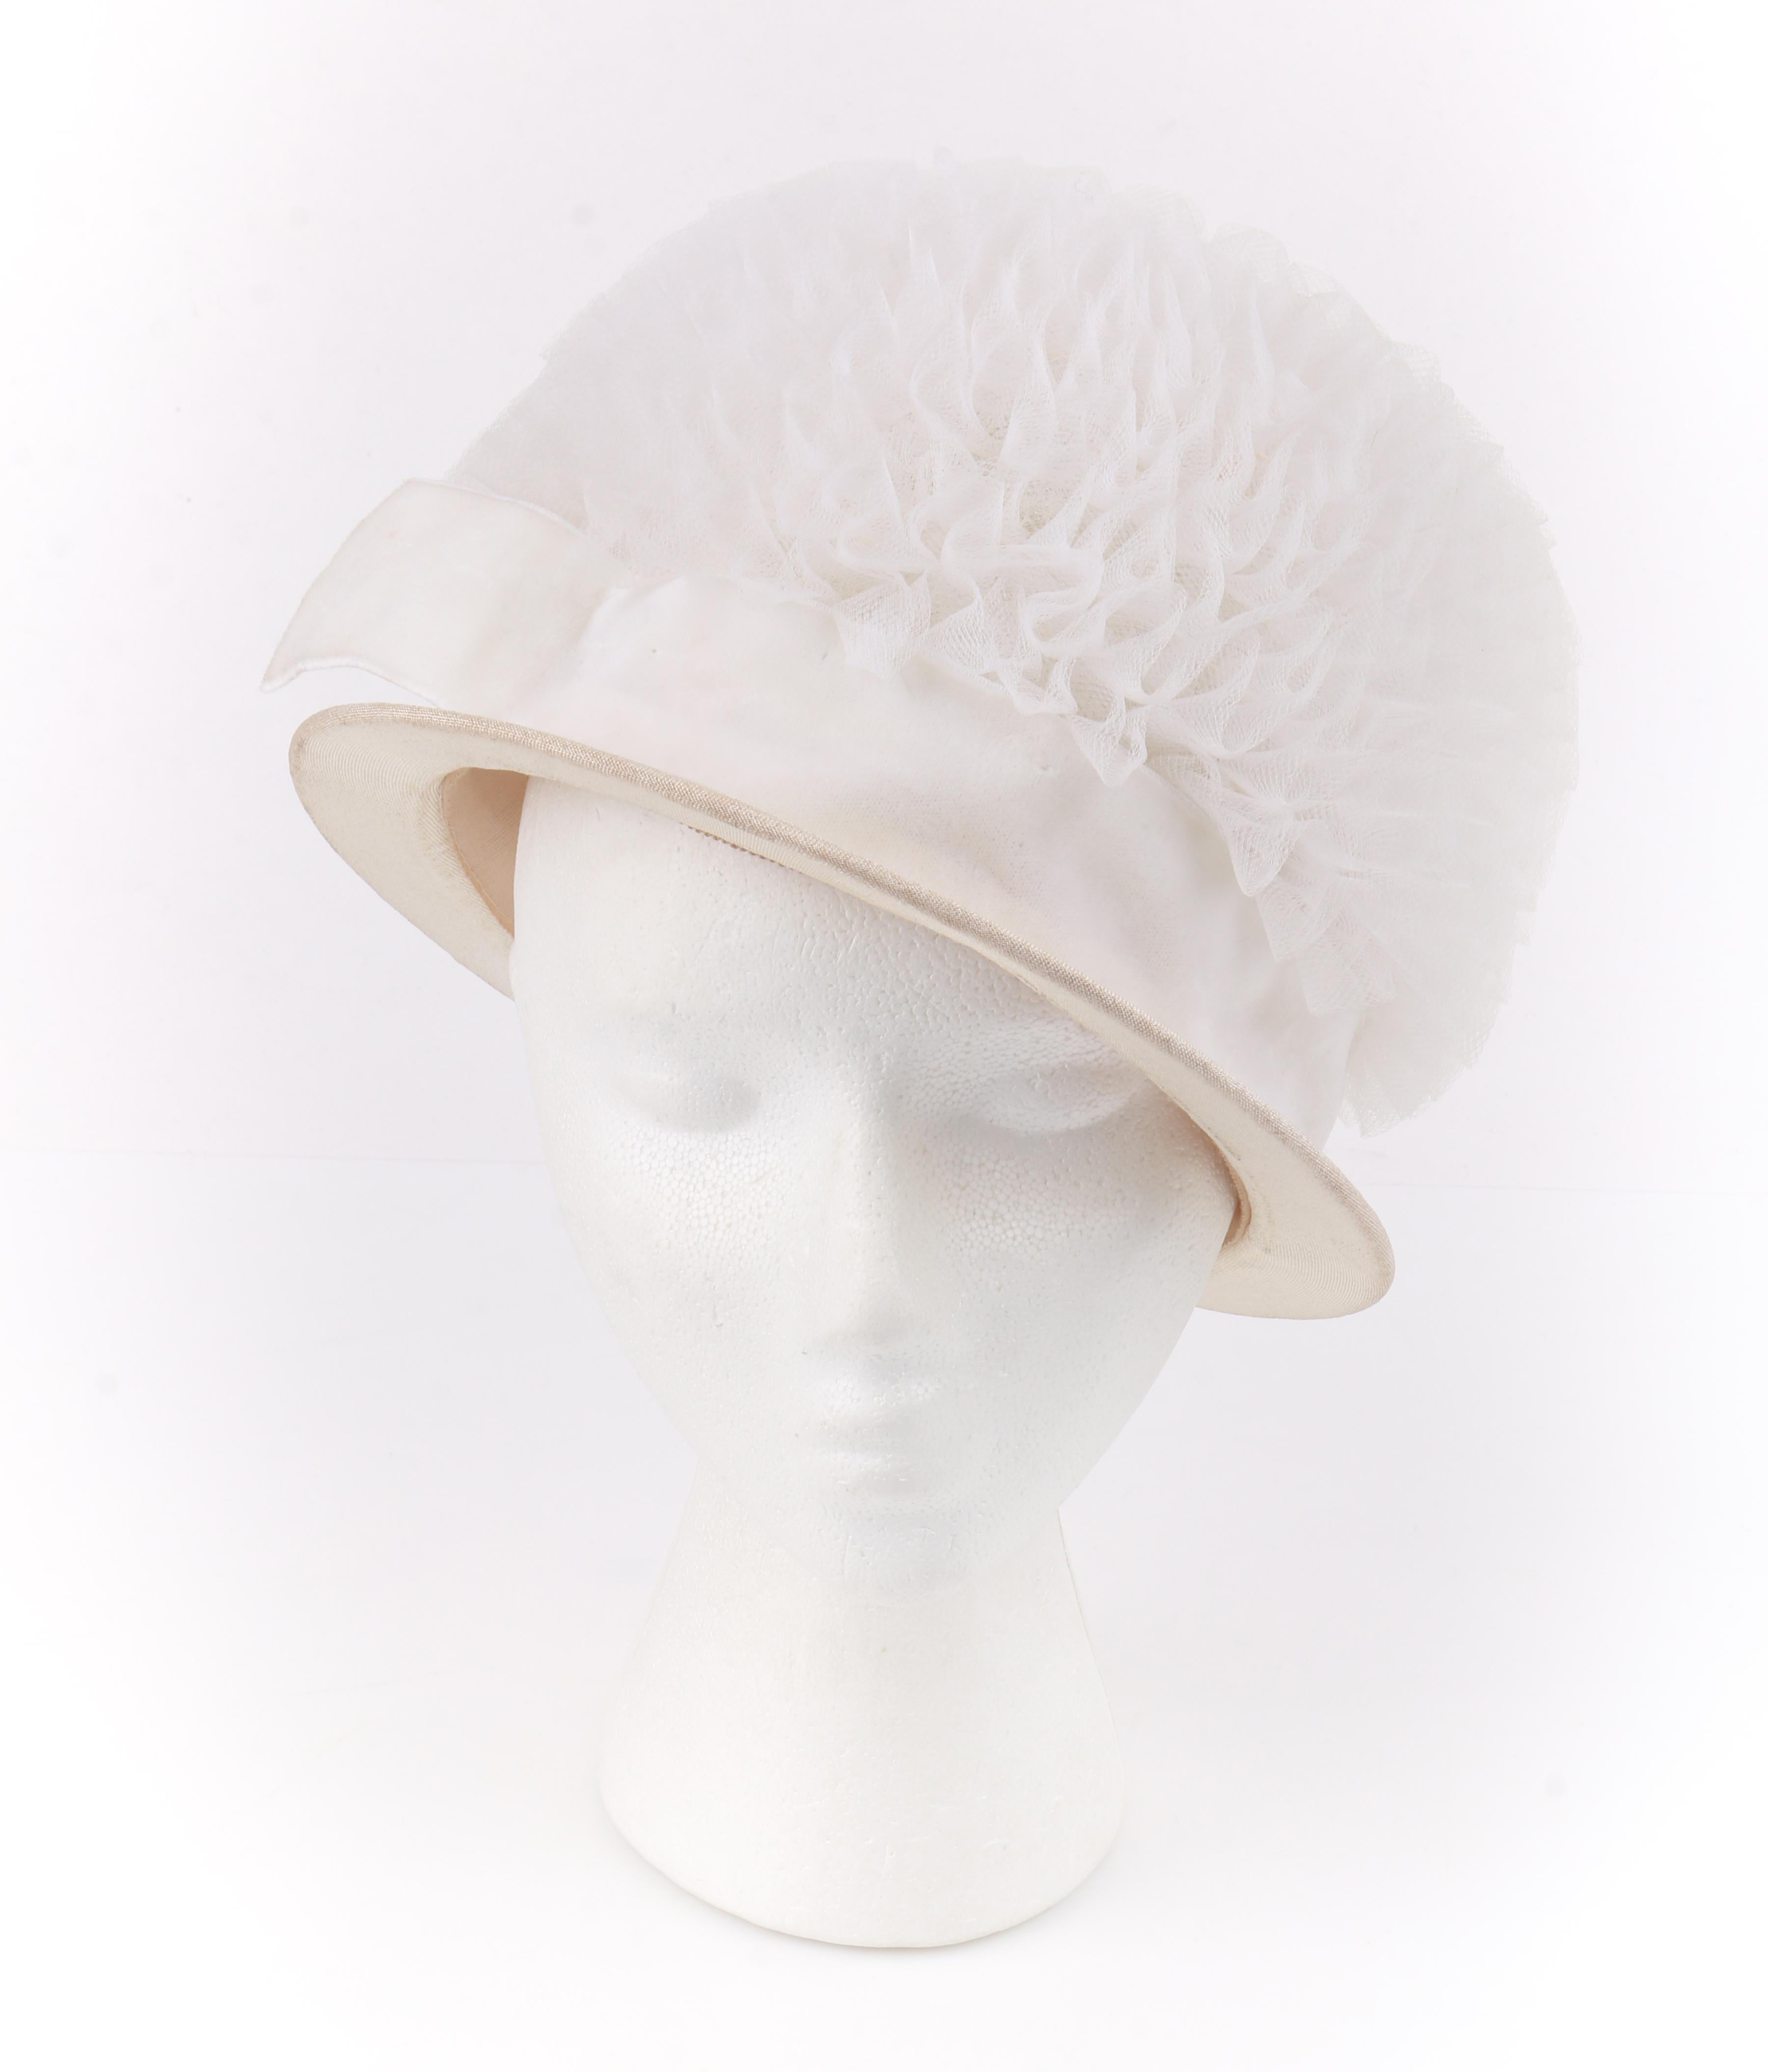 HUBERT DE GIVENCHY ADAPTION c.1950's Gathered Tulle Velvet Ribbon Cloche Hat

Circa: 1950’s 
Label(s): Hubert de Givenchy; Union label
Style: Cloche Hat
Color(s): Shades of white / cream
Lined: No
Unmarked Fabric Content: Tulle (exterior); velvet